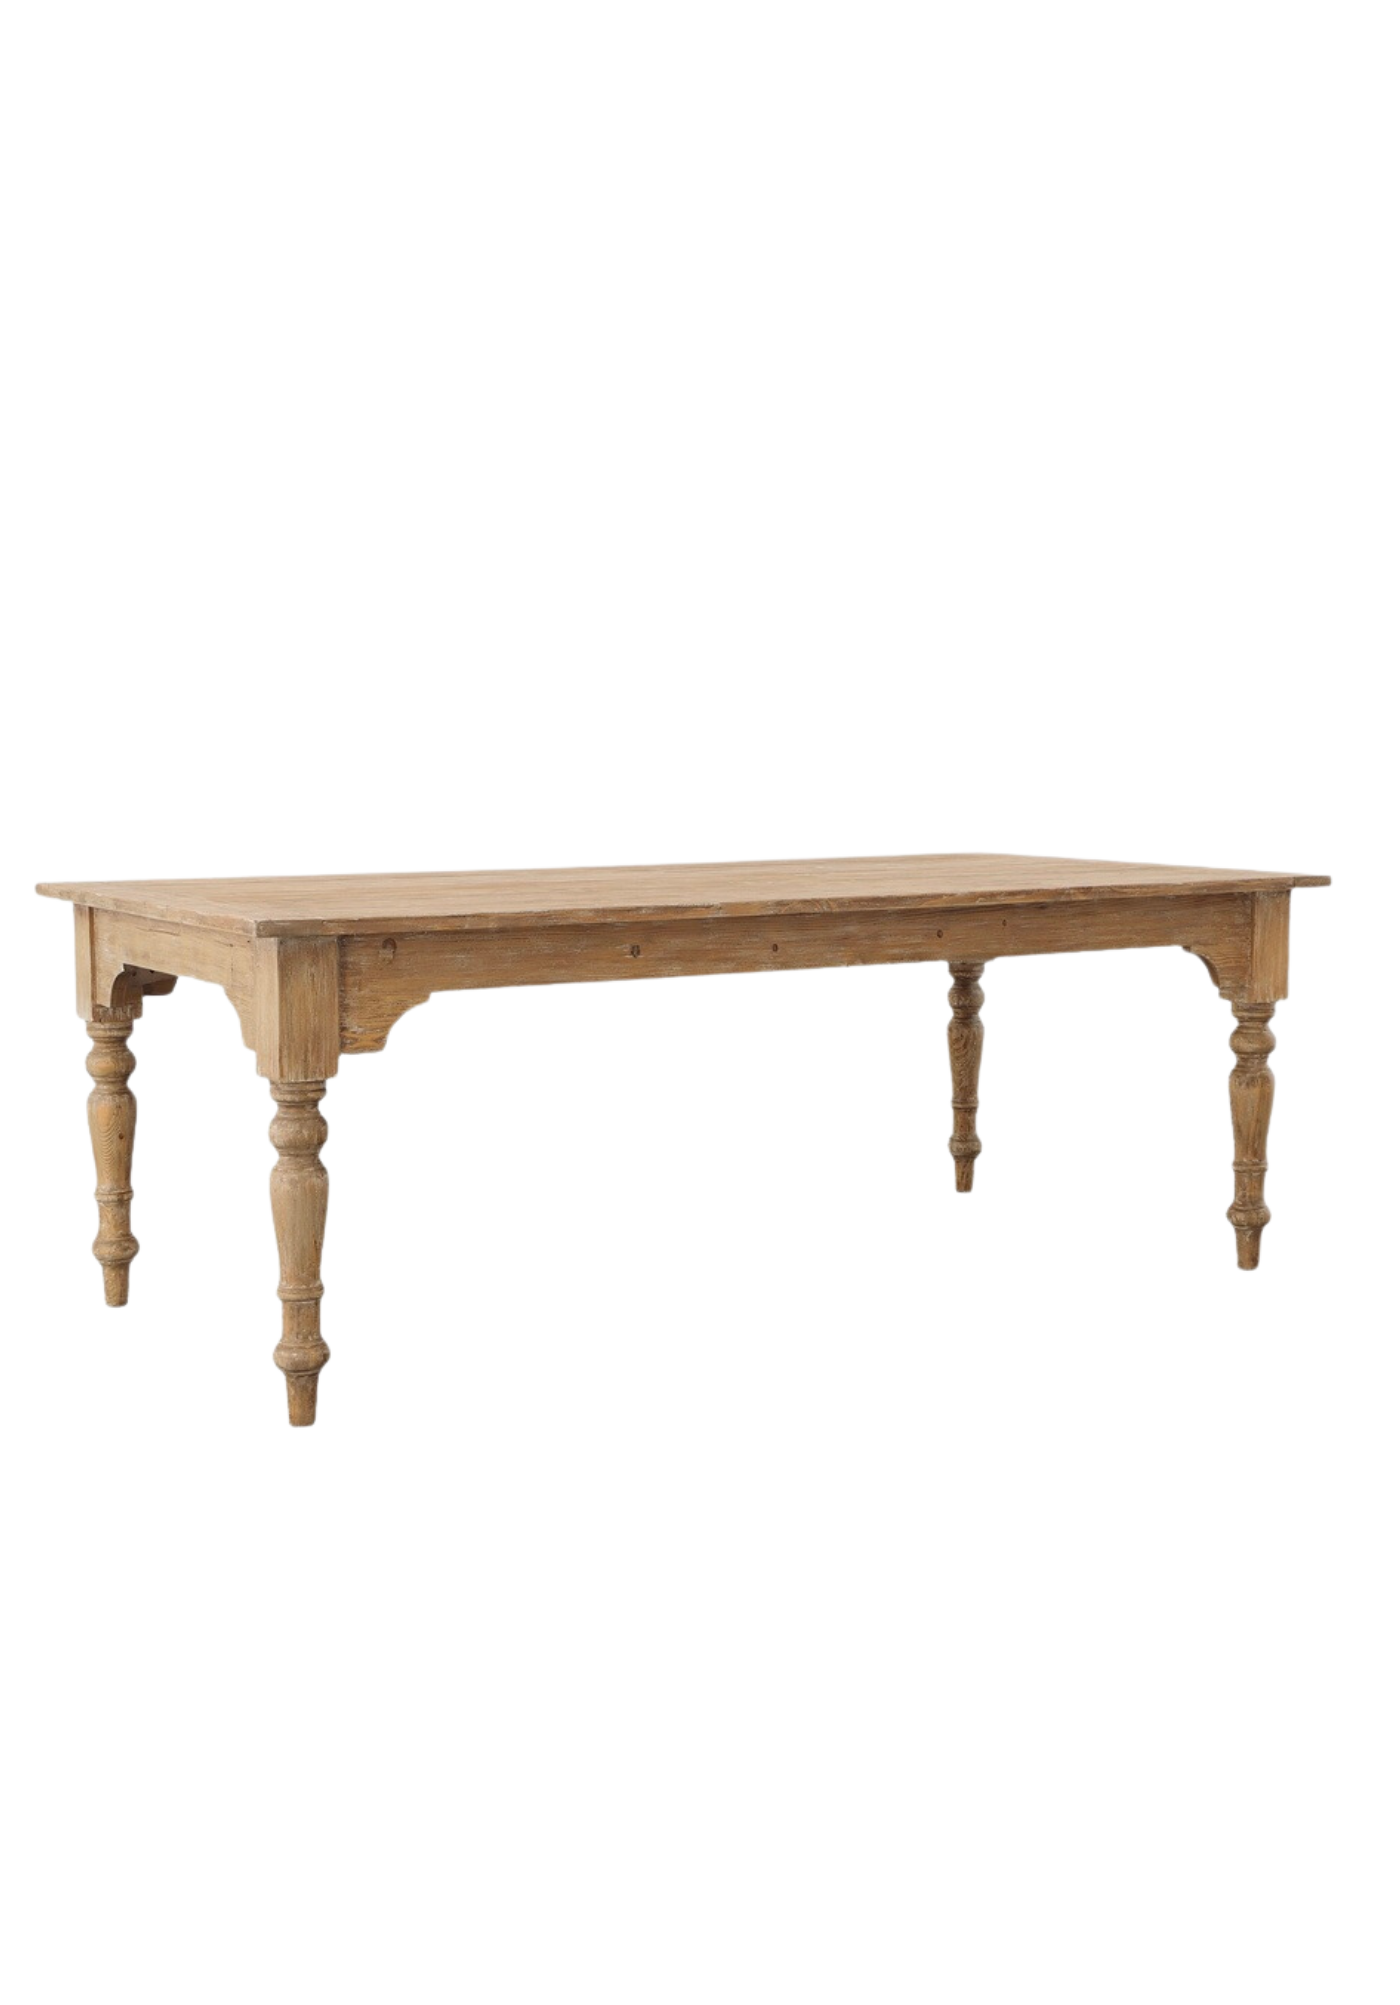 Margot Dining Table